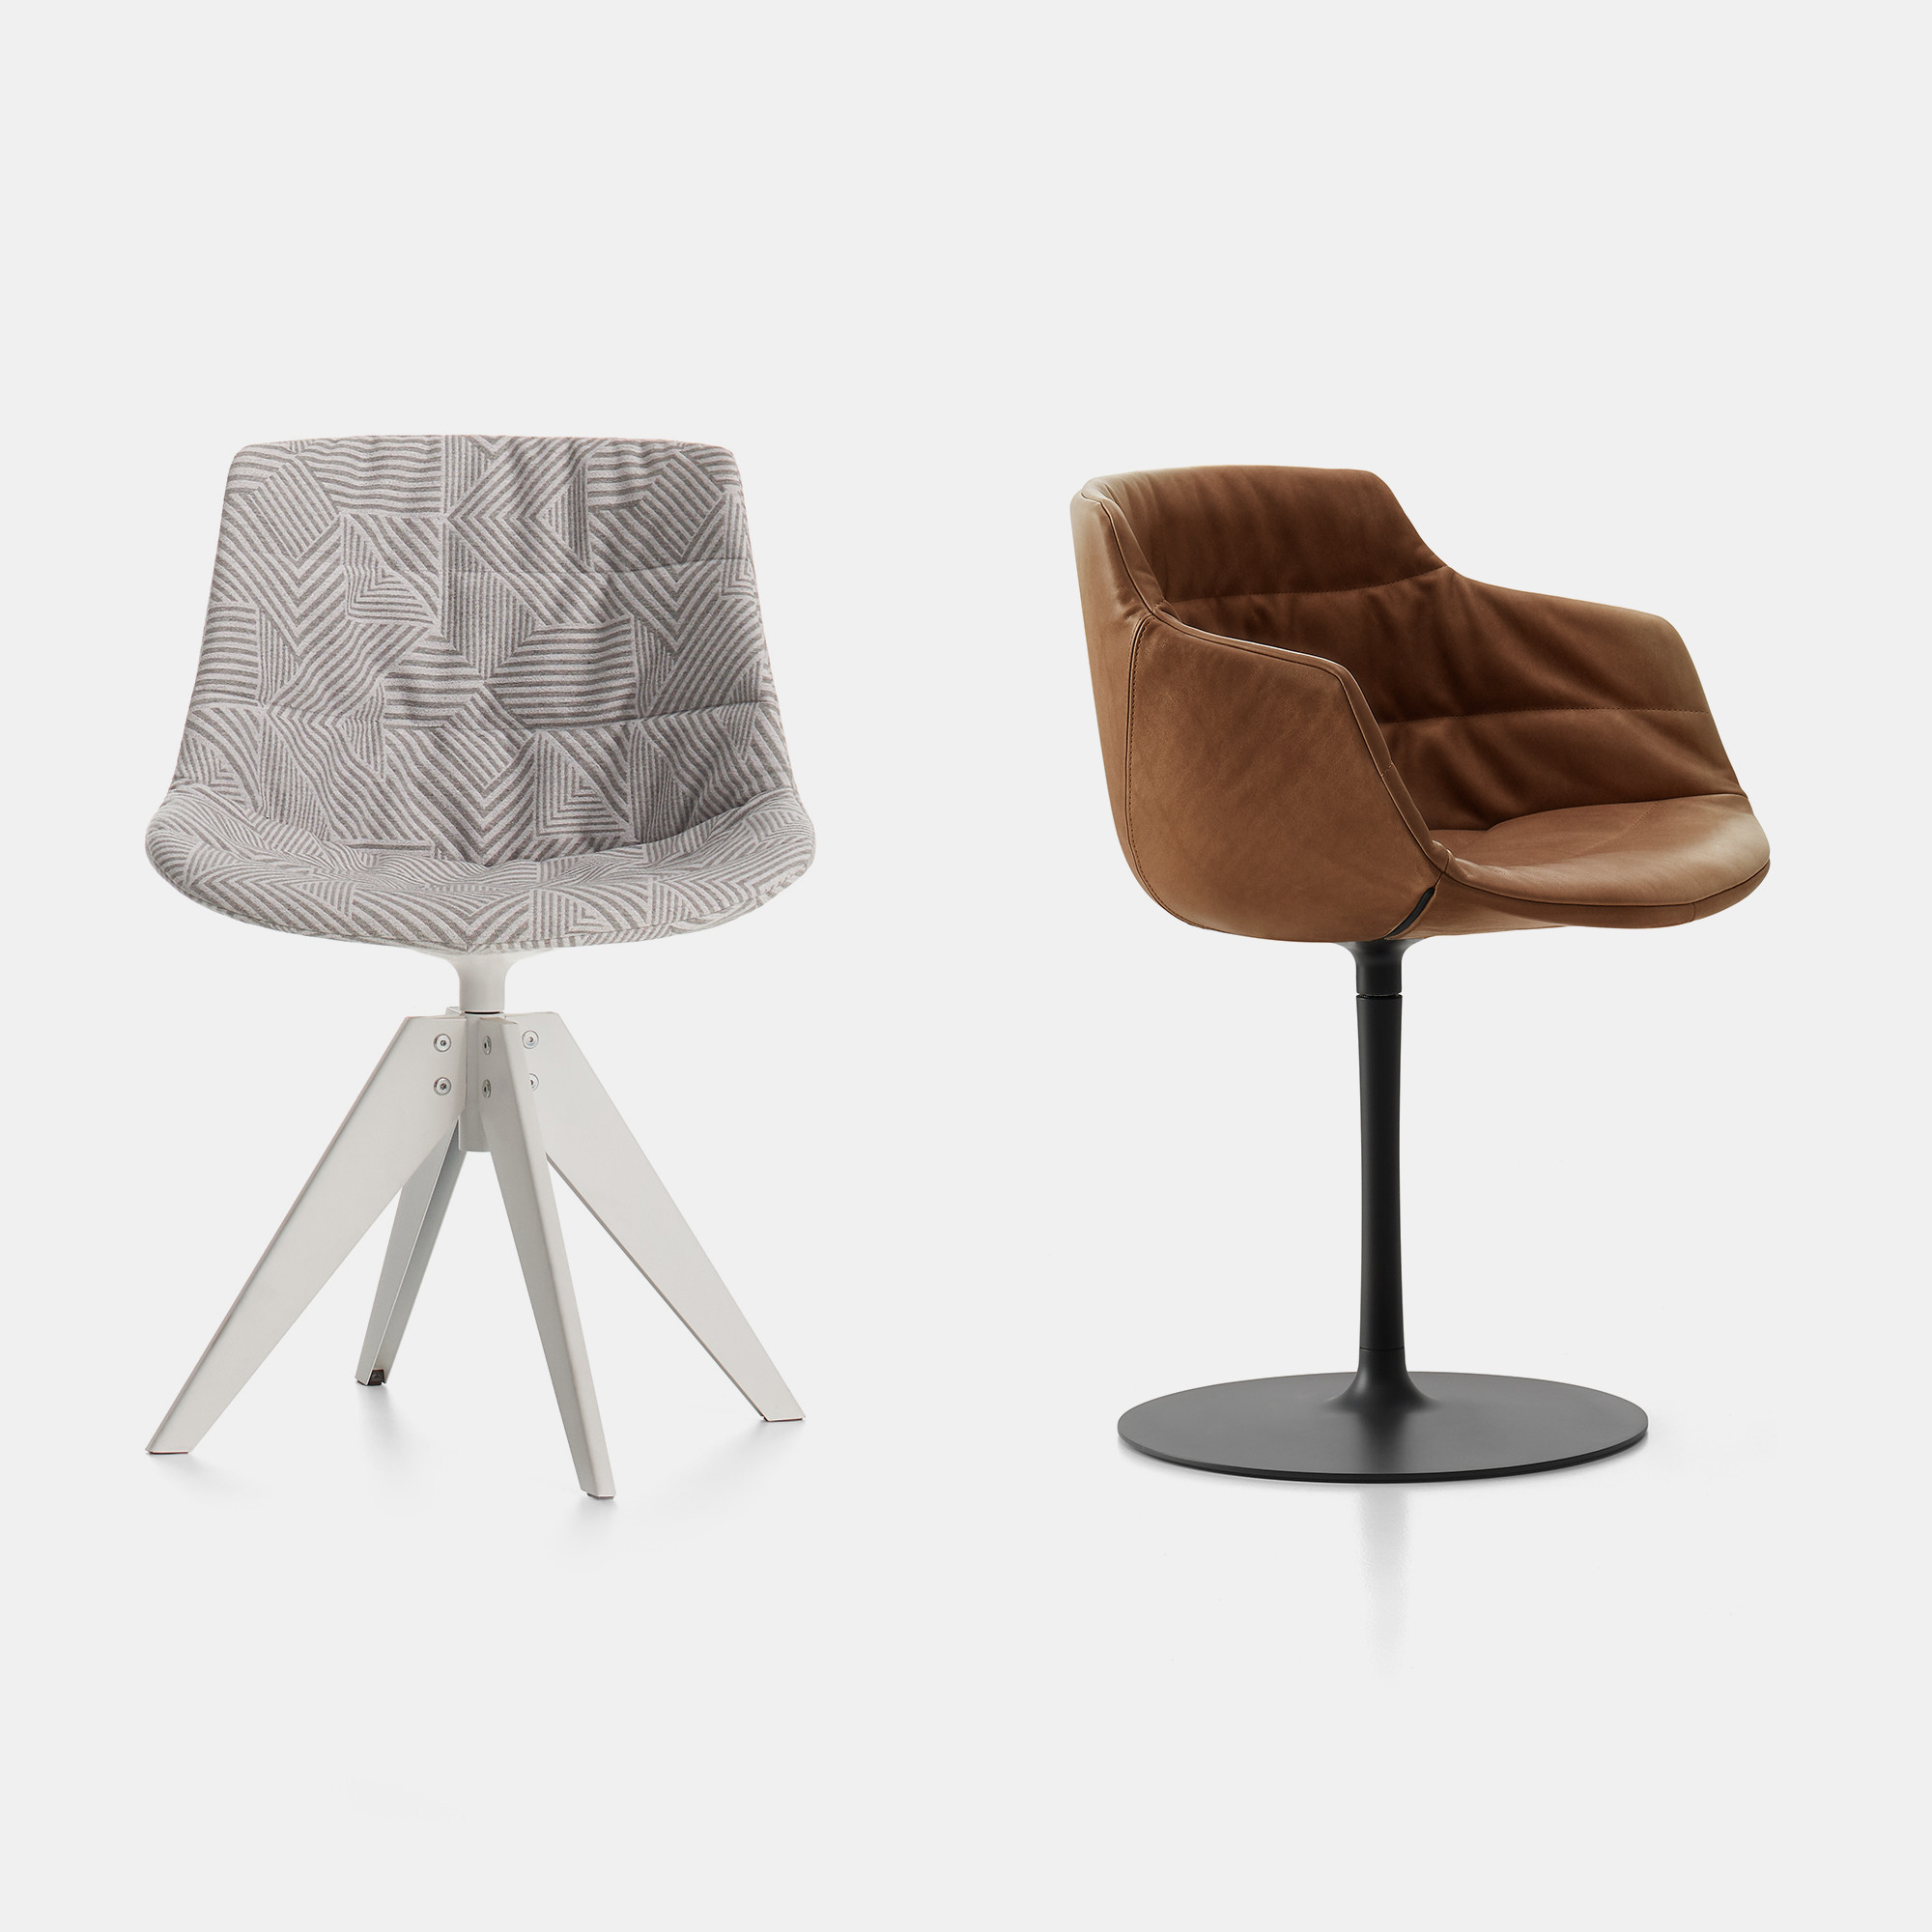 FLOW TEXTILE. A chair that gives comfort and allows a great customization.